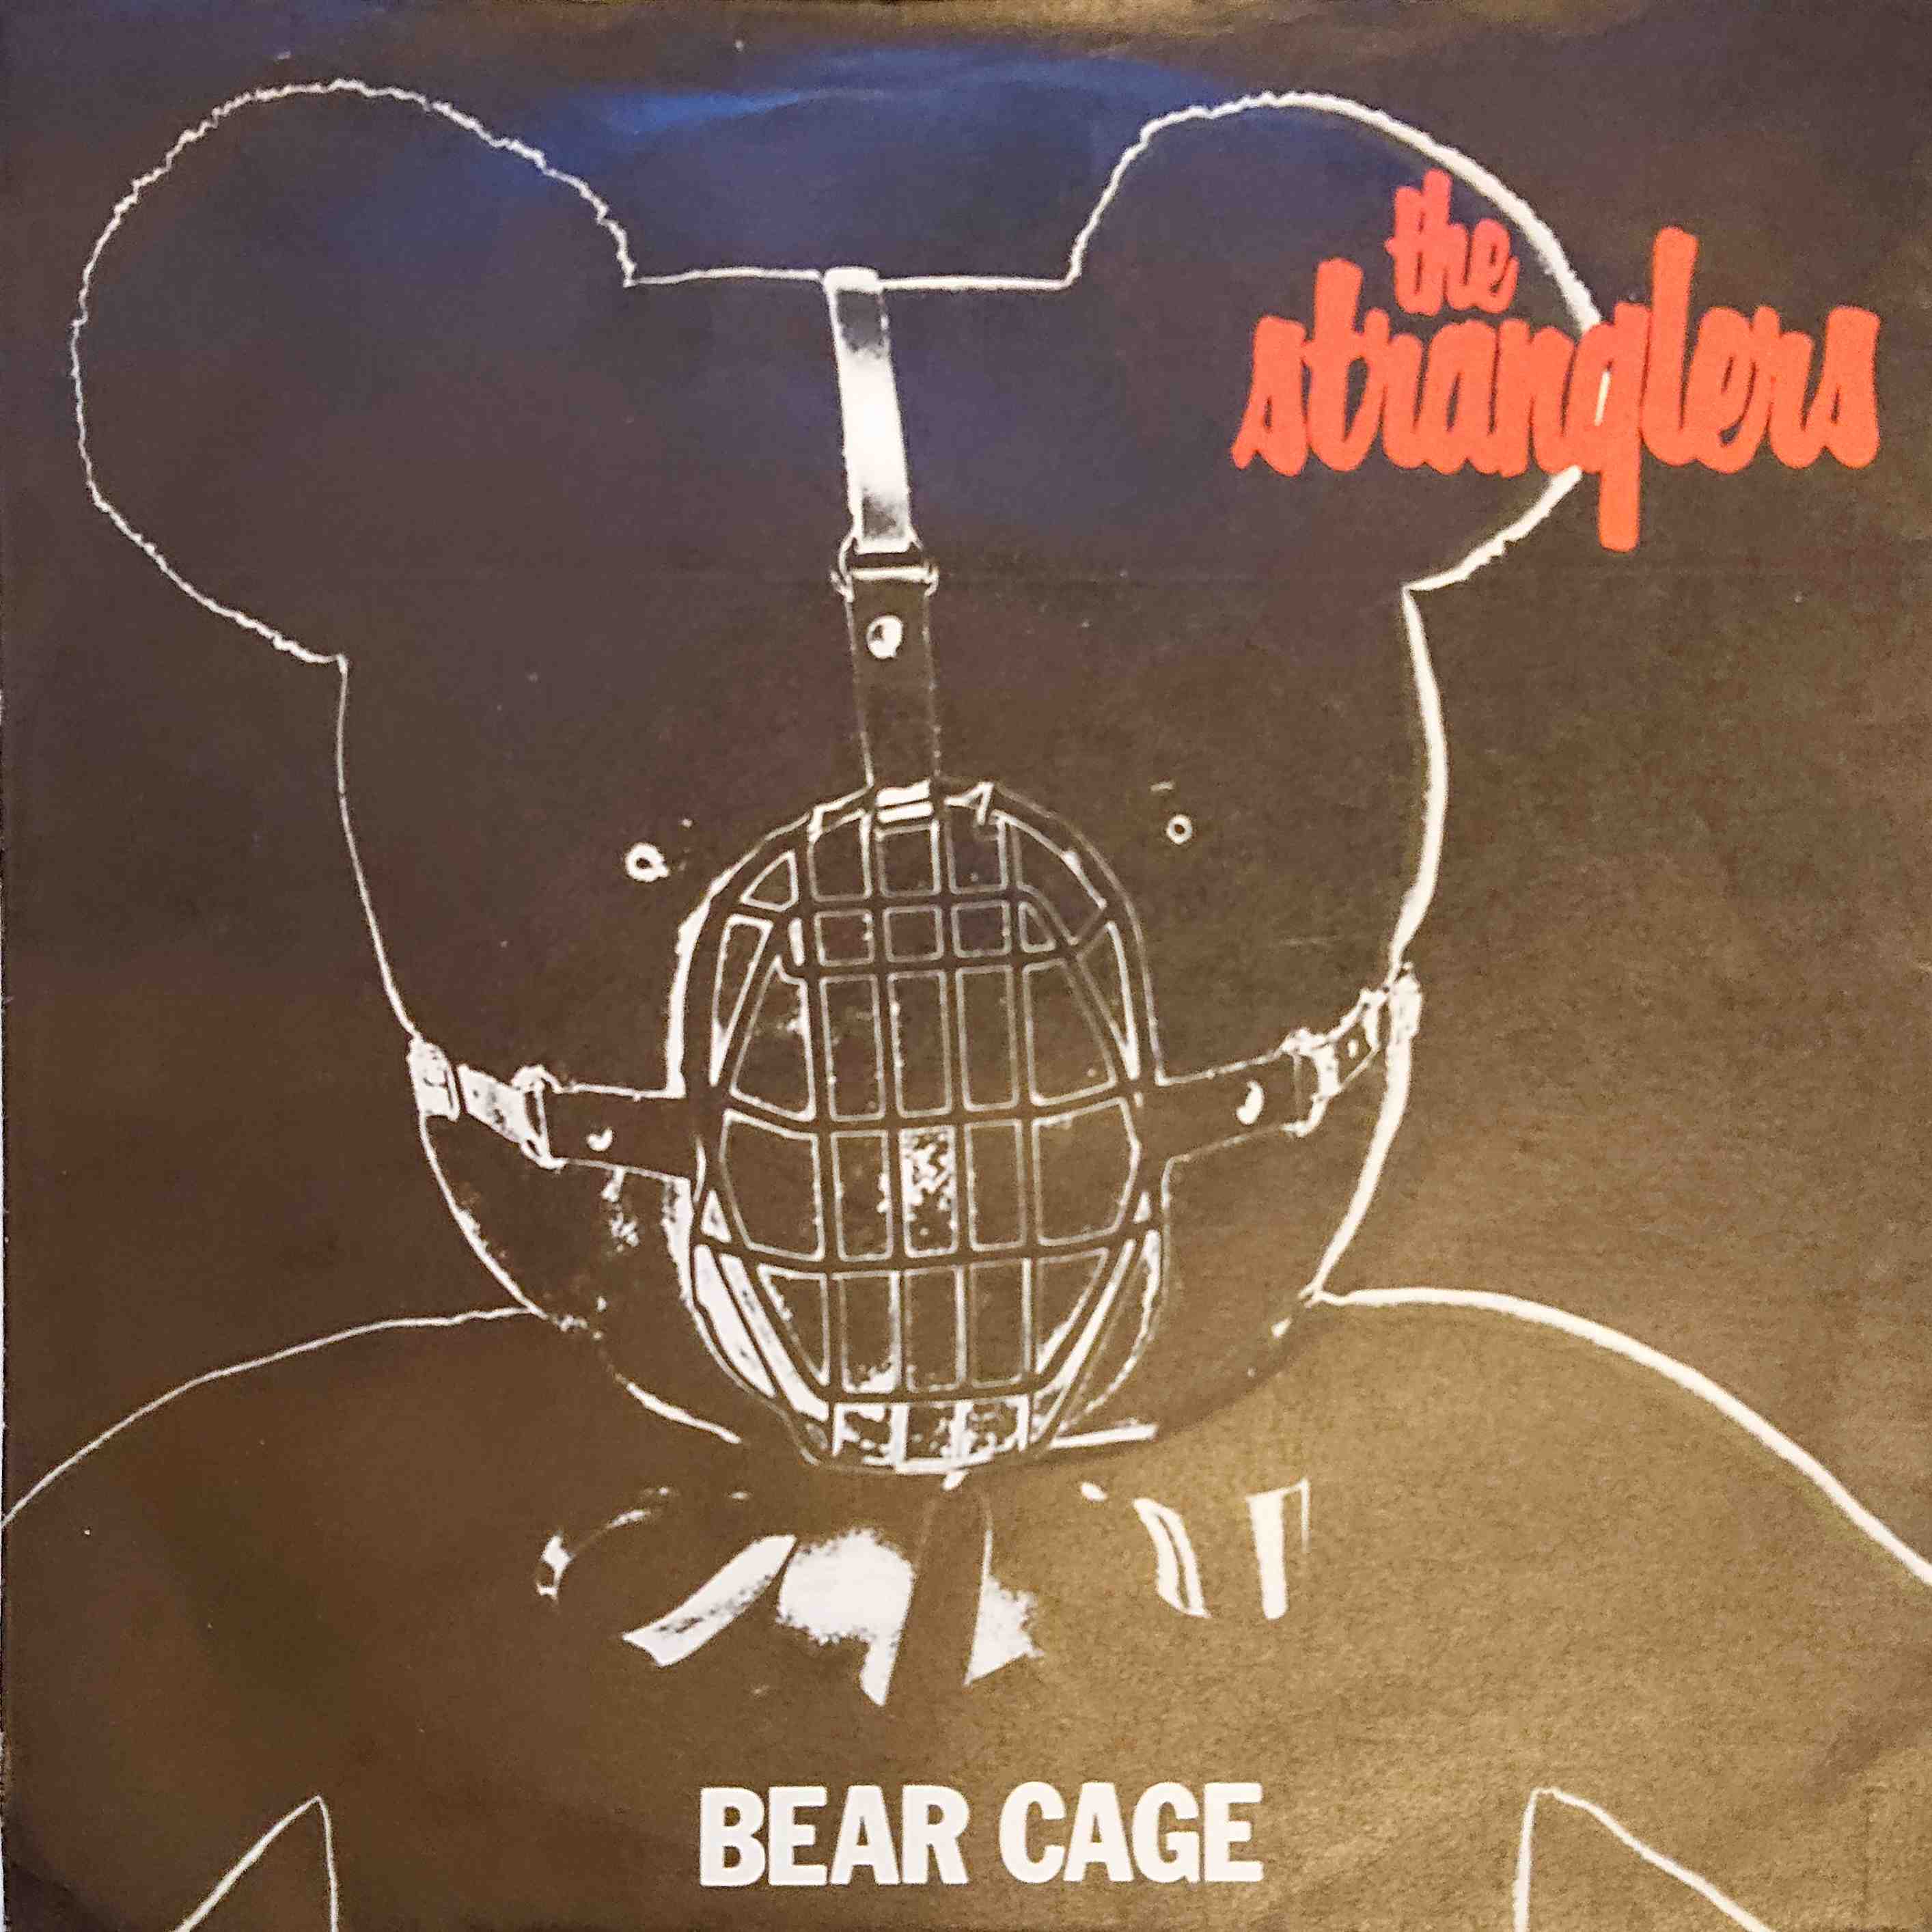 Picture of Bear cage by artist The Stranglers  from The Stranglers singles